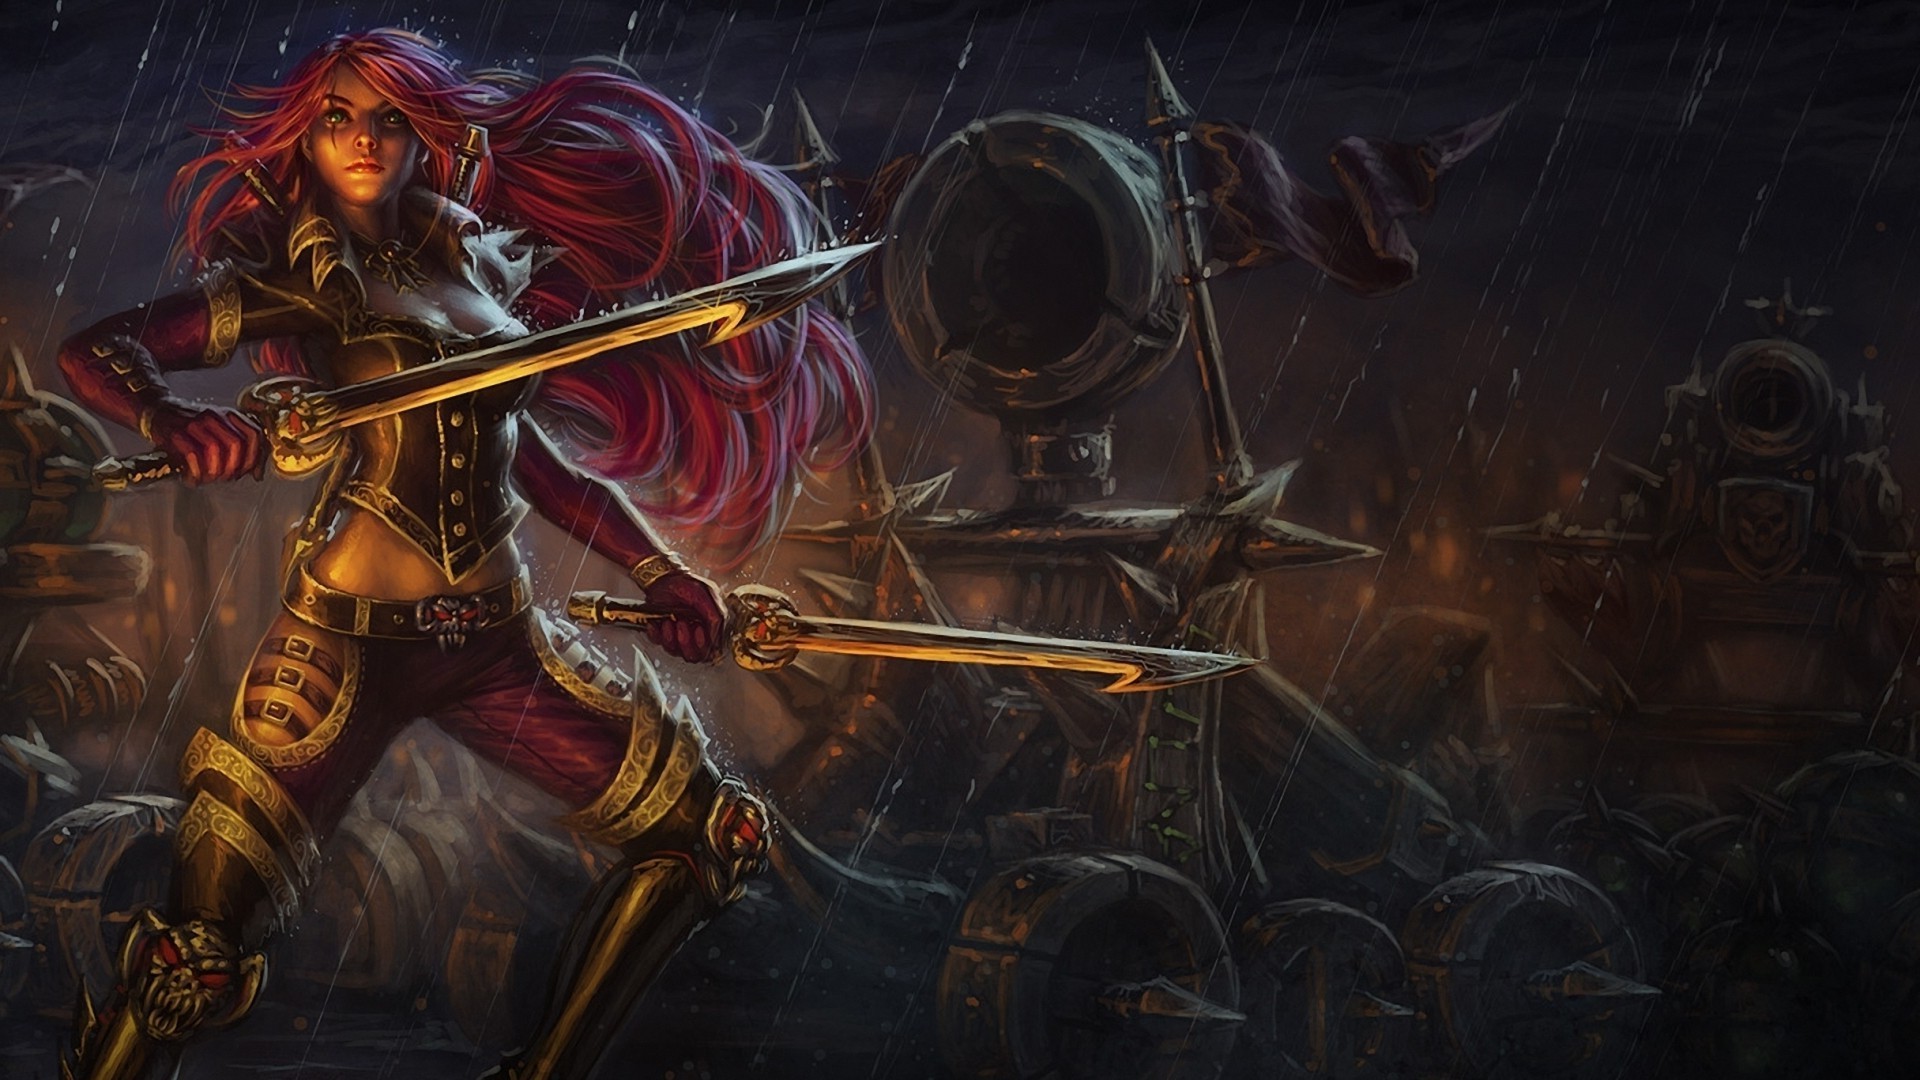 General 1920x1080 Katarina (League of Legends) PC gaming rain fantasy girl fantasy art pirates redhead weapon video game warriors League of Legends women with swords sword long hair standing video game girls video game art